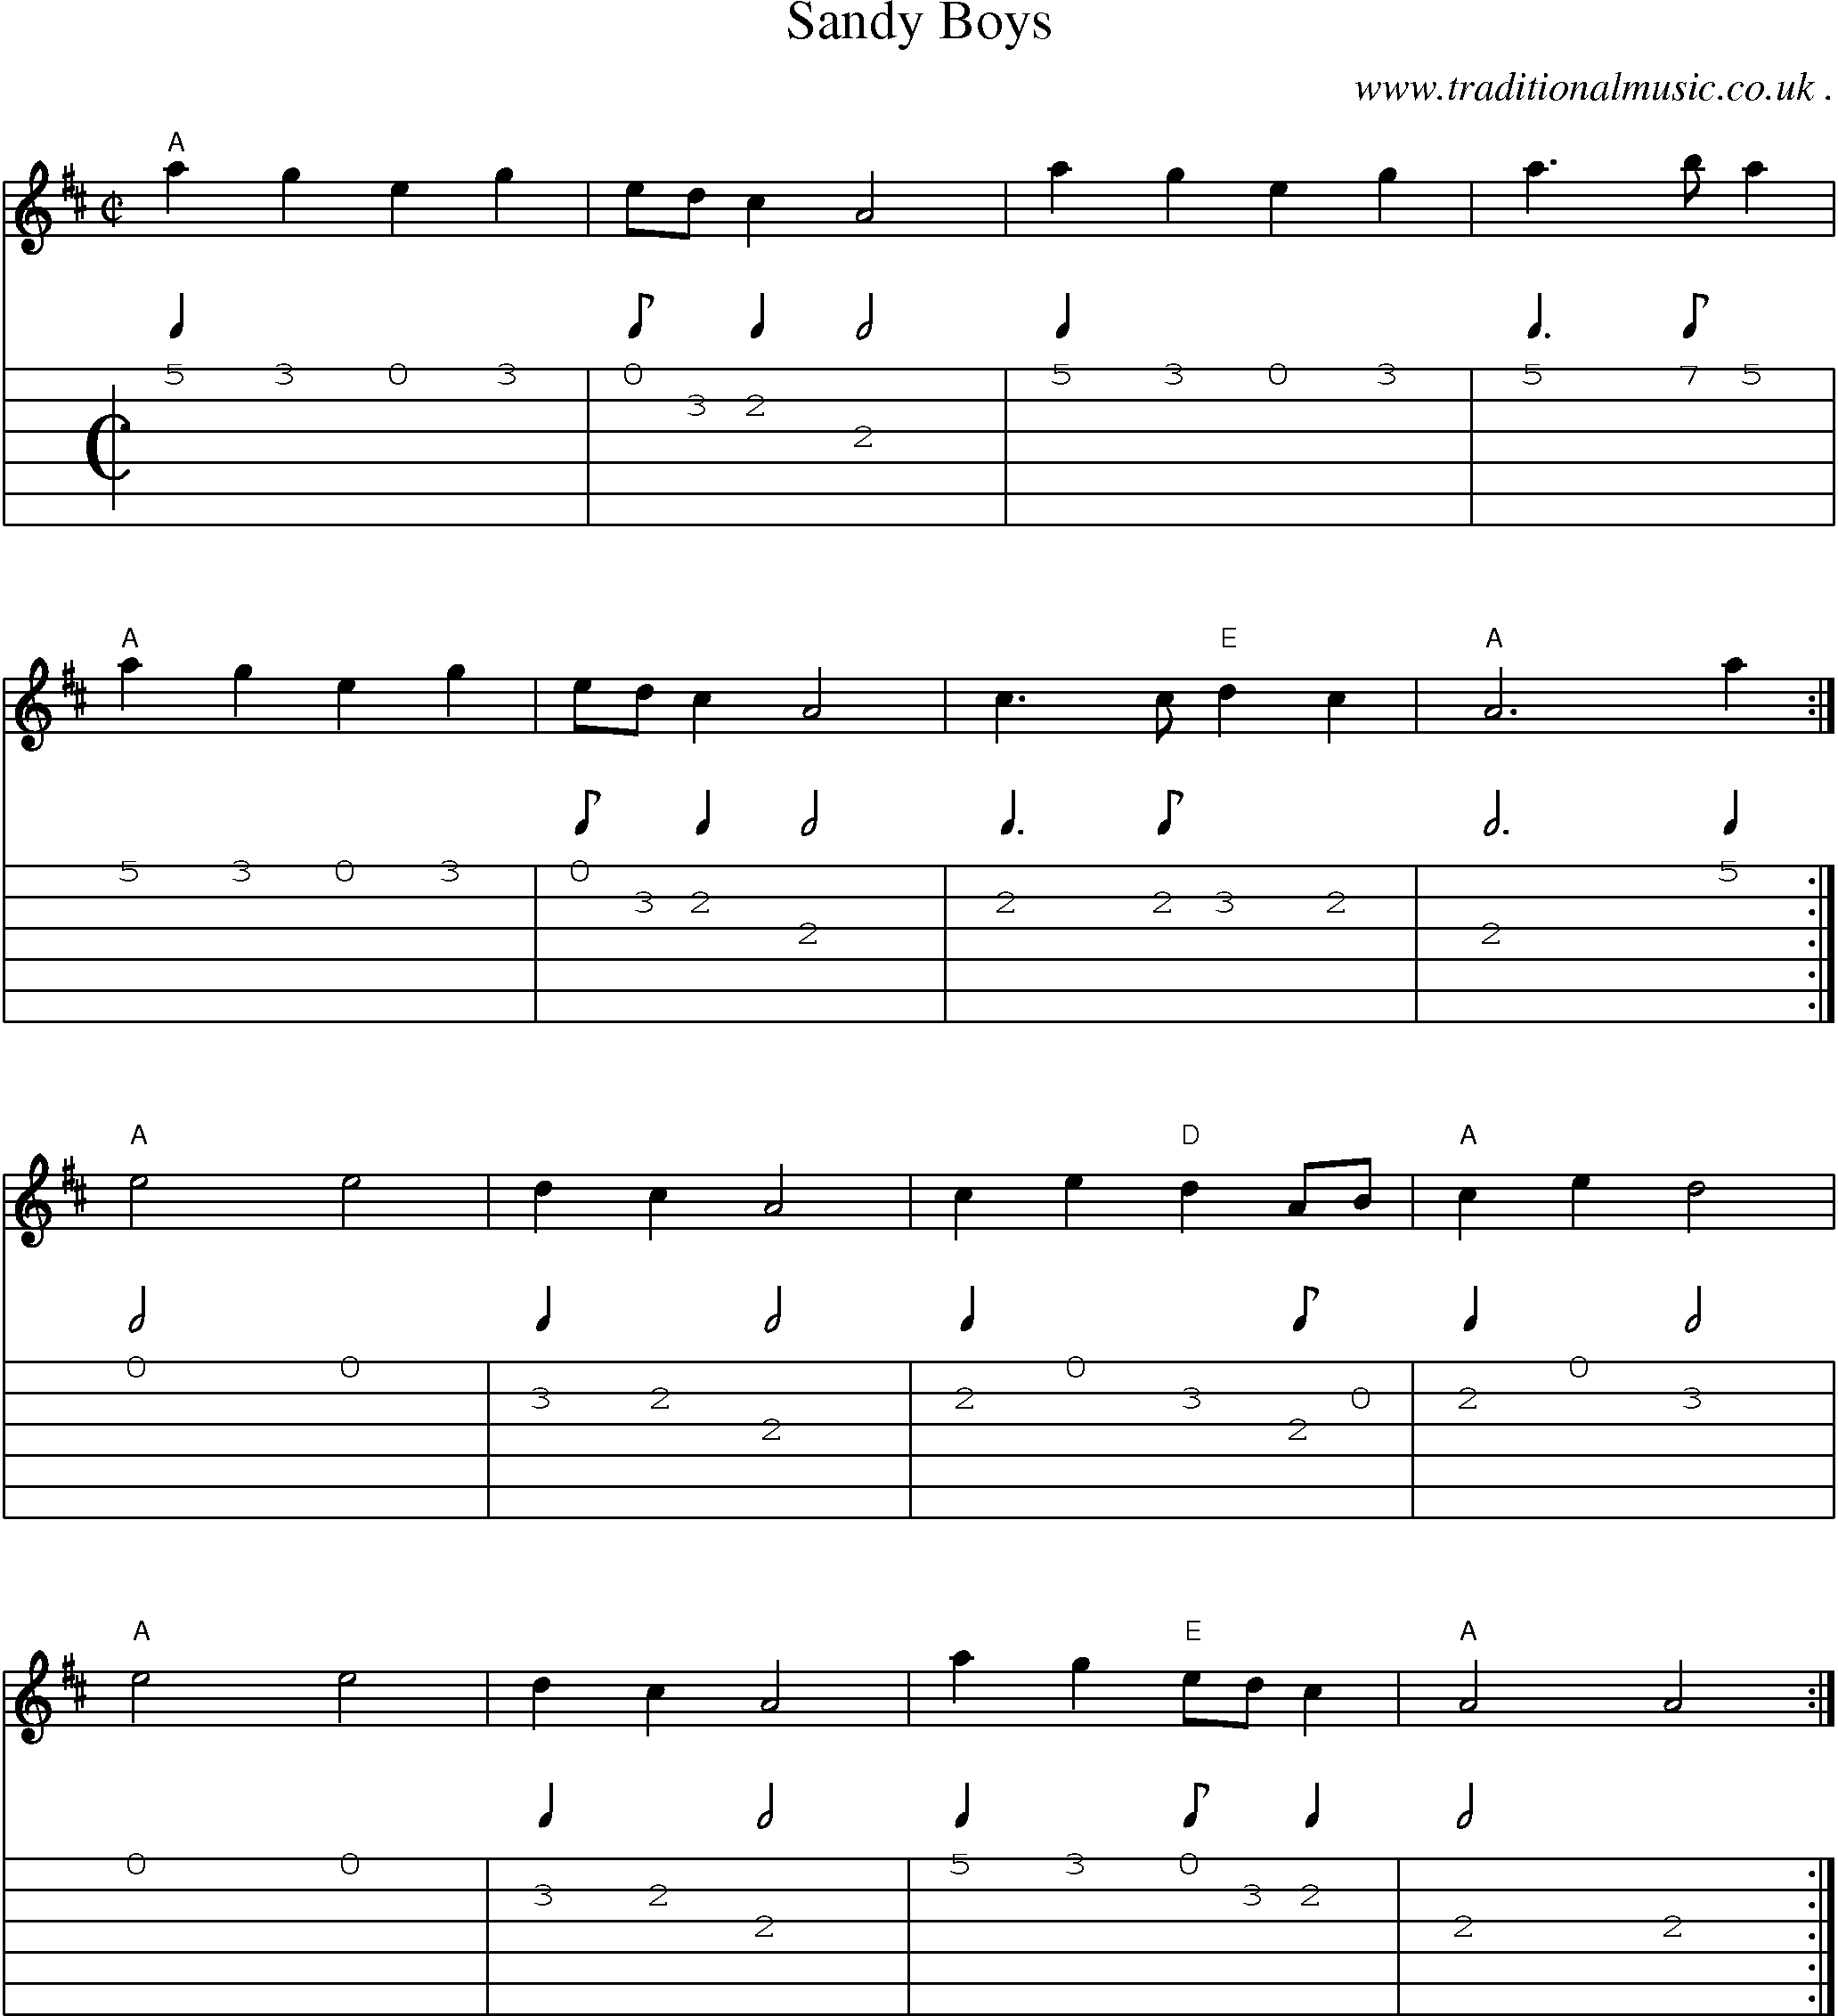 Music Score and Guitar Tabs for Sandy Boys